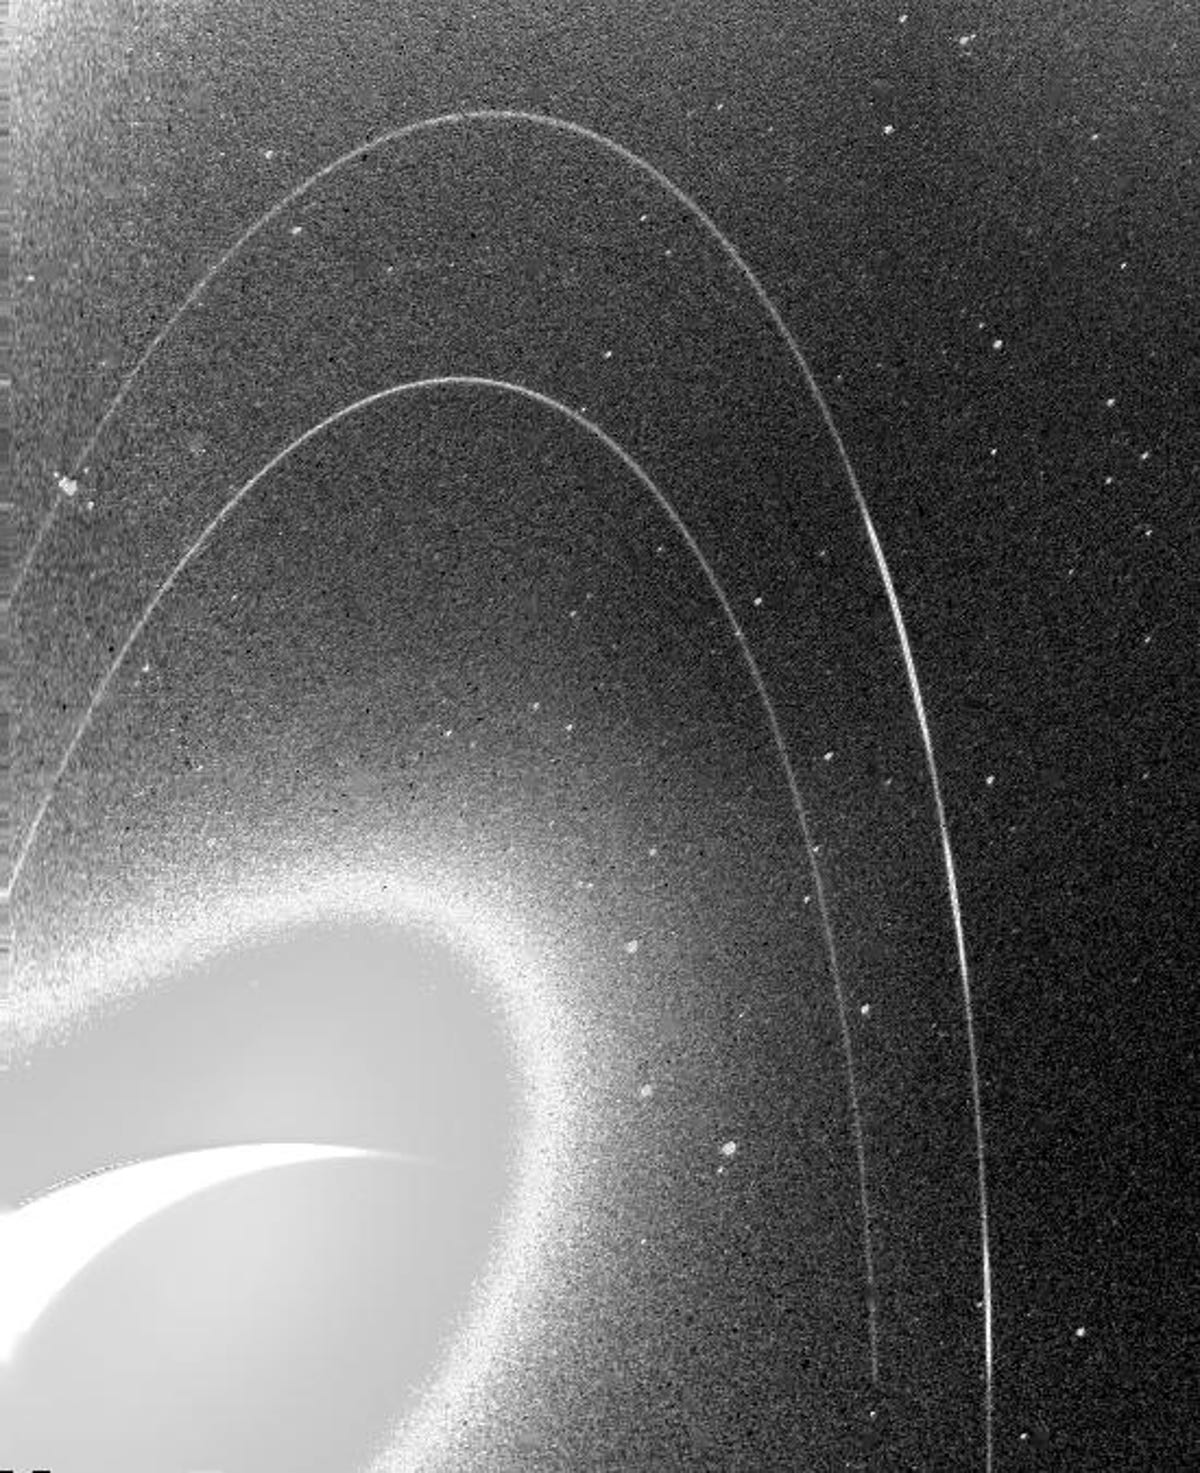 A grainy, black-and-white image shows Neptune's faint rings.